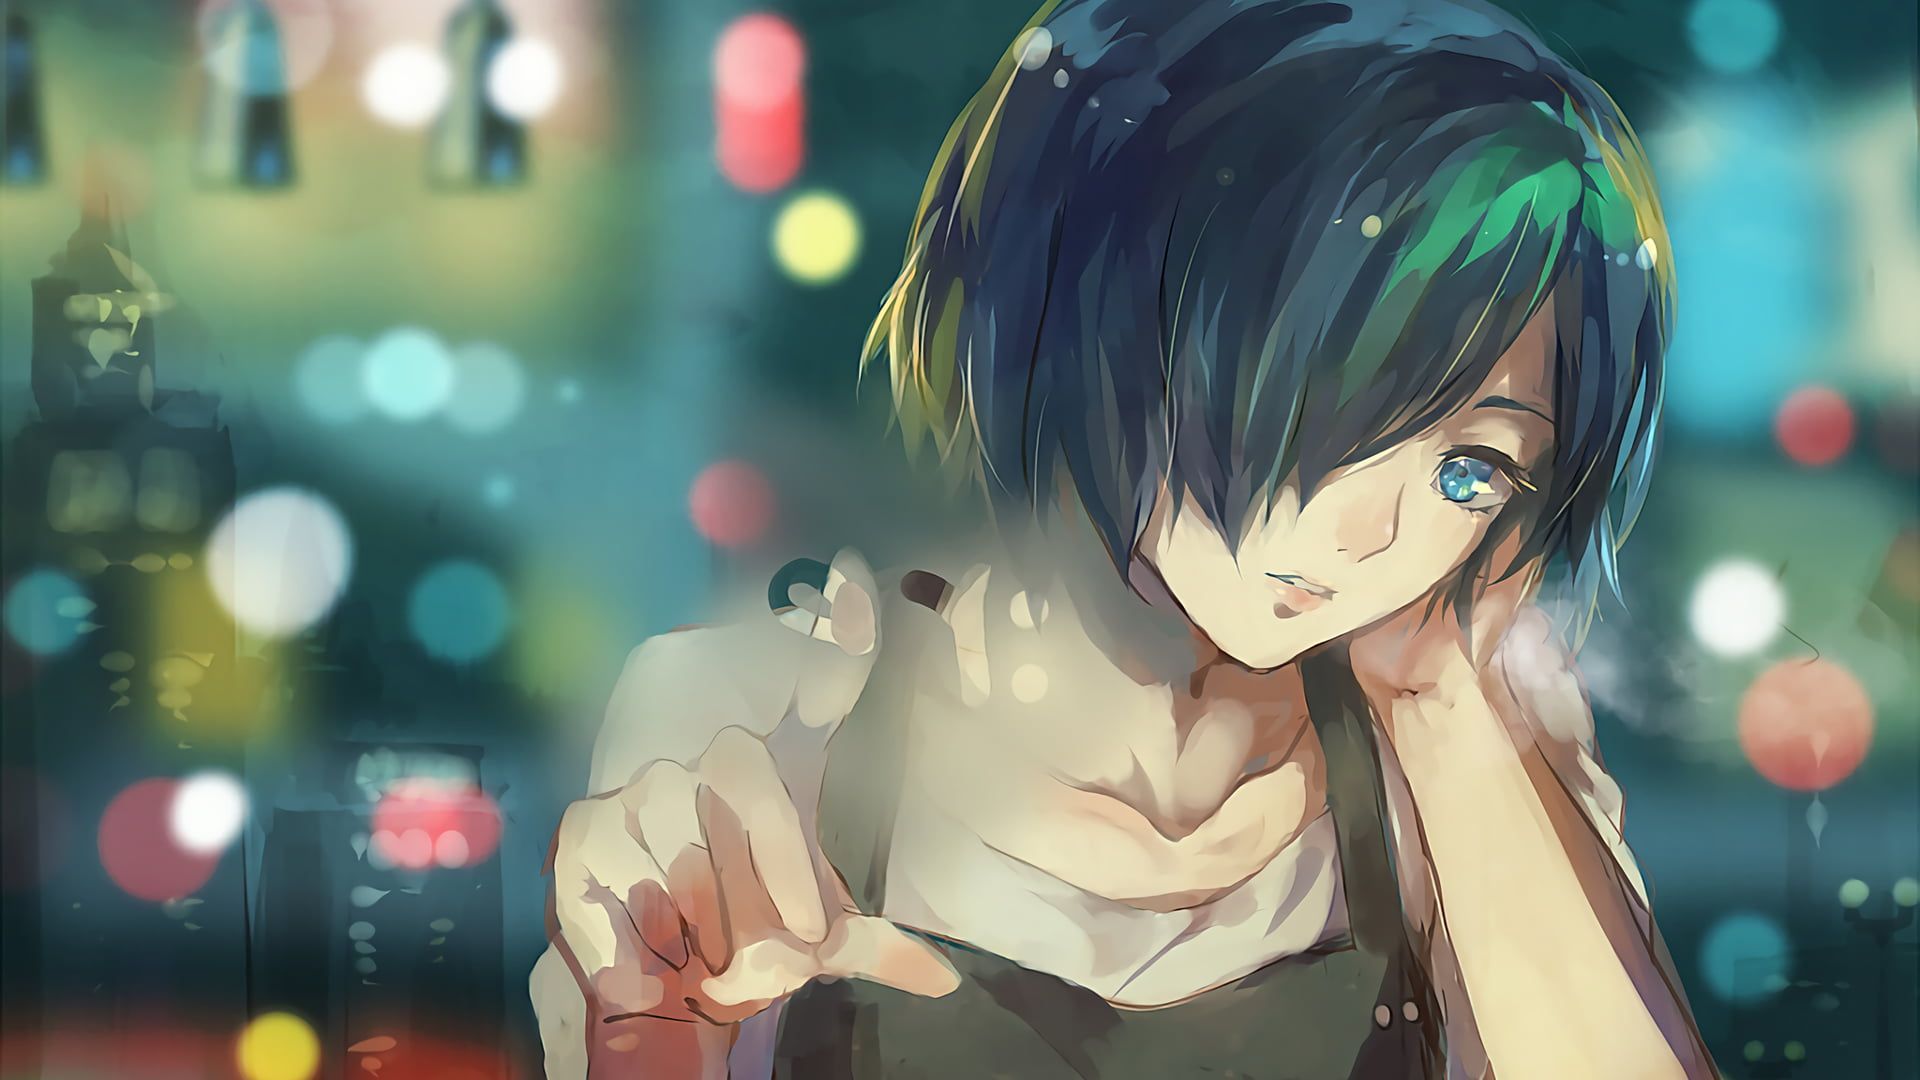 green haired female anime character illustration, woman in black